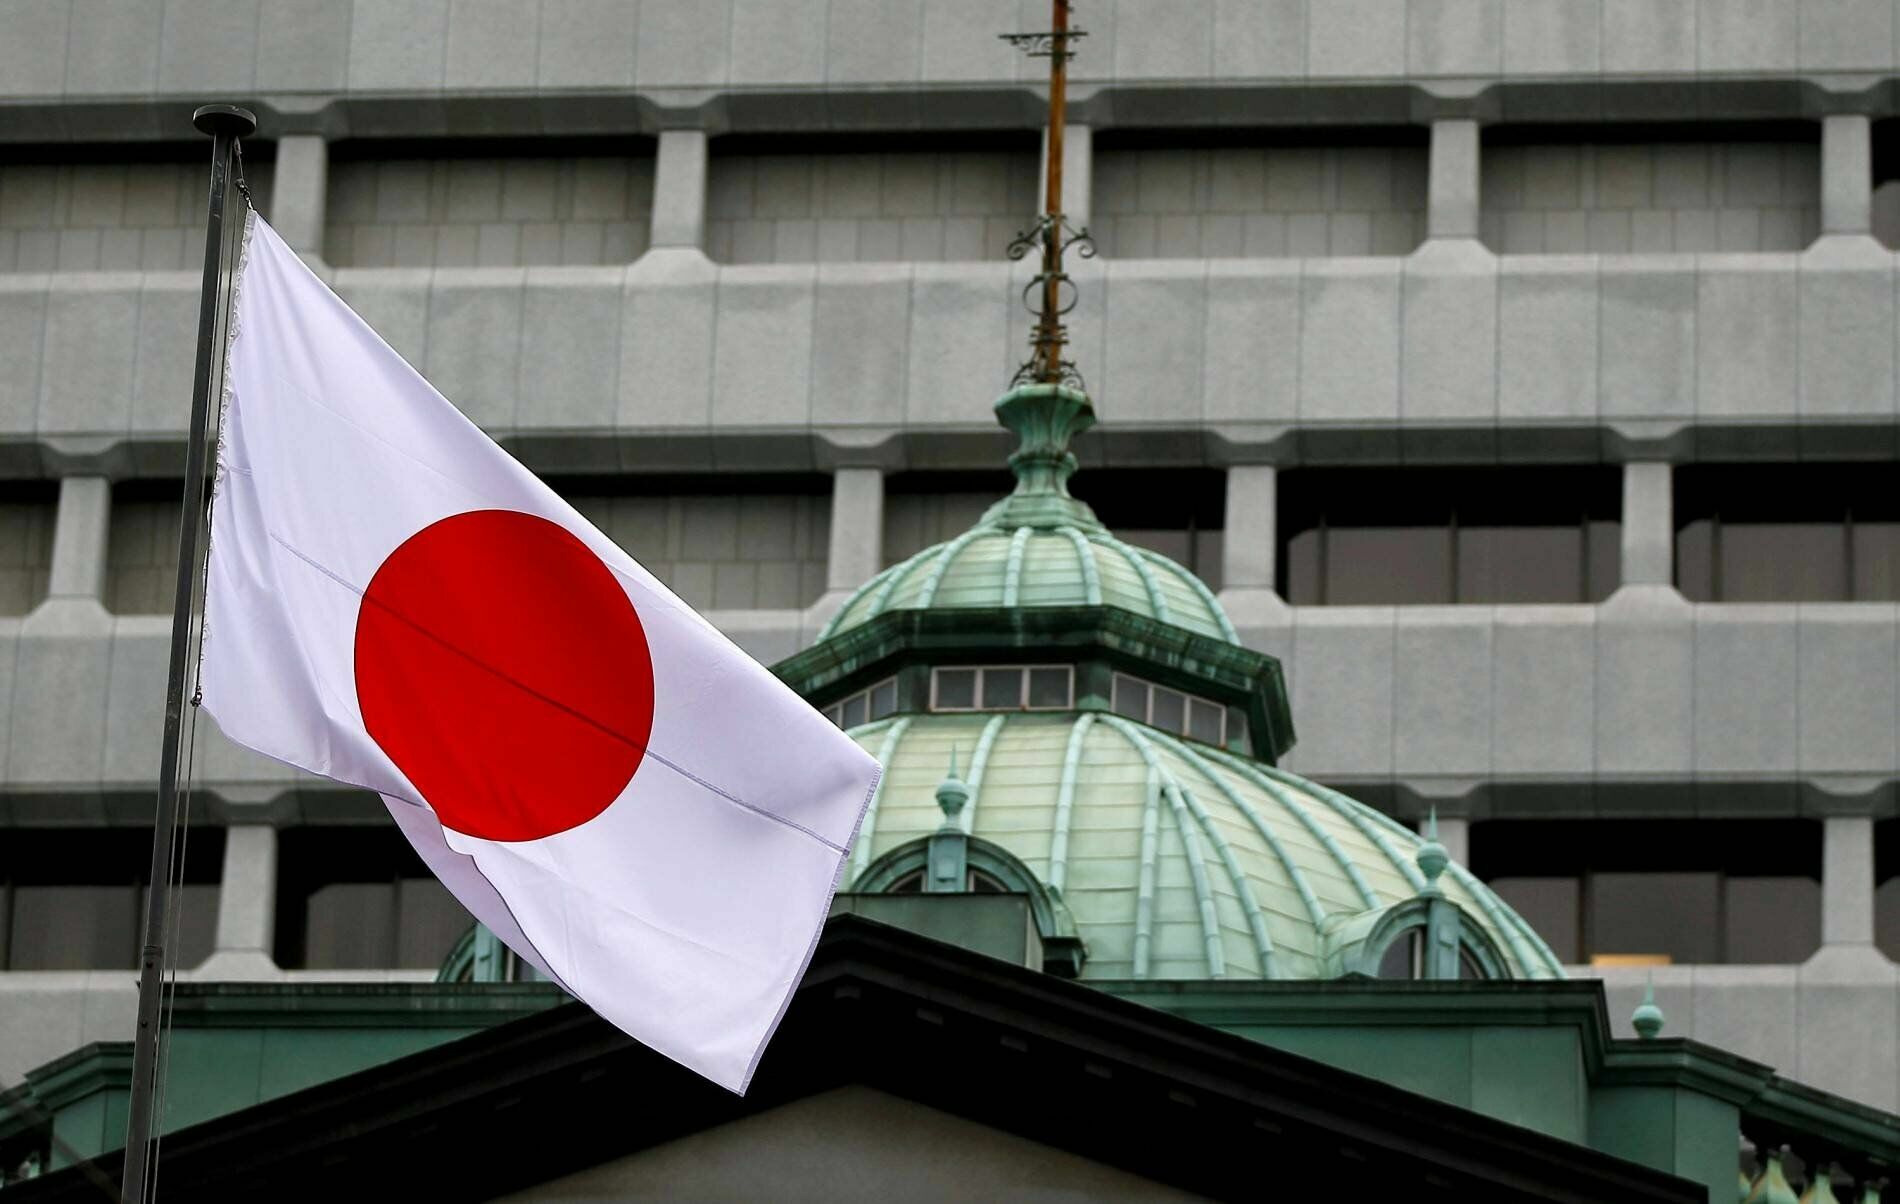 Japan added 25 more individuals and 81 organizations from Russia to the sanctions list